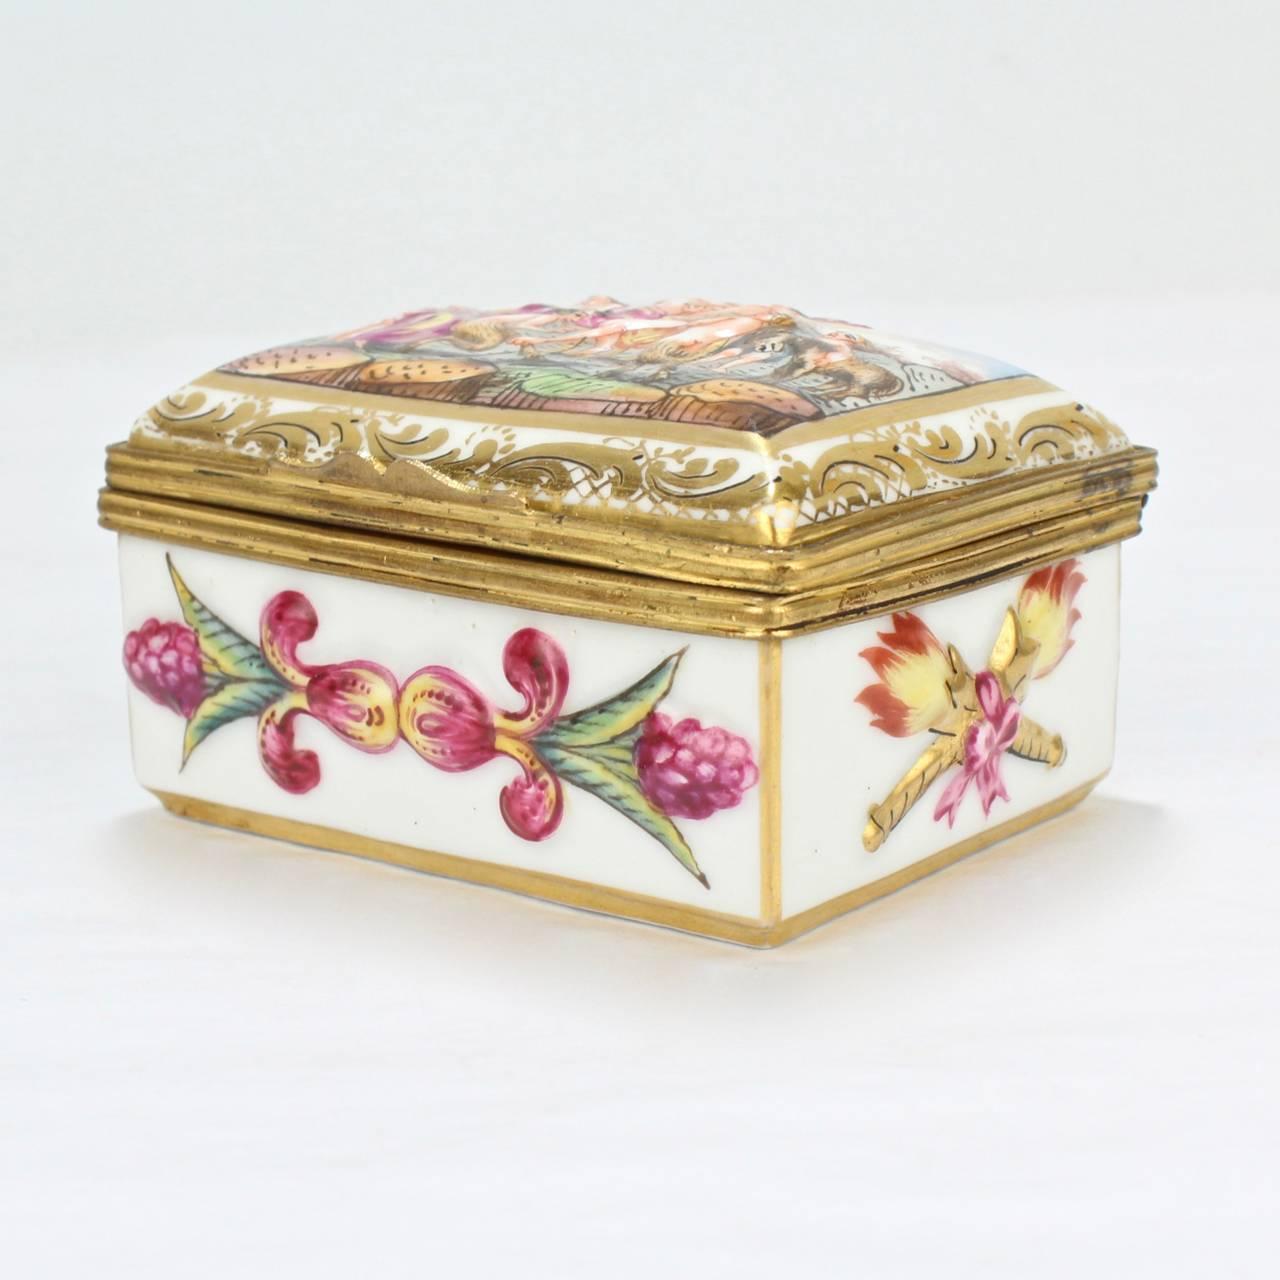 A fine, antique Capodimonte porcelain table snuff box in the Meissen style.

With a polychrome enamel Bacchanalian scene on the lid, neoclassical devices on the side panels, and a fine gilt bronze mount.

The base bears a blue underglaze 'N